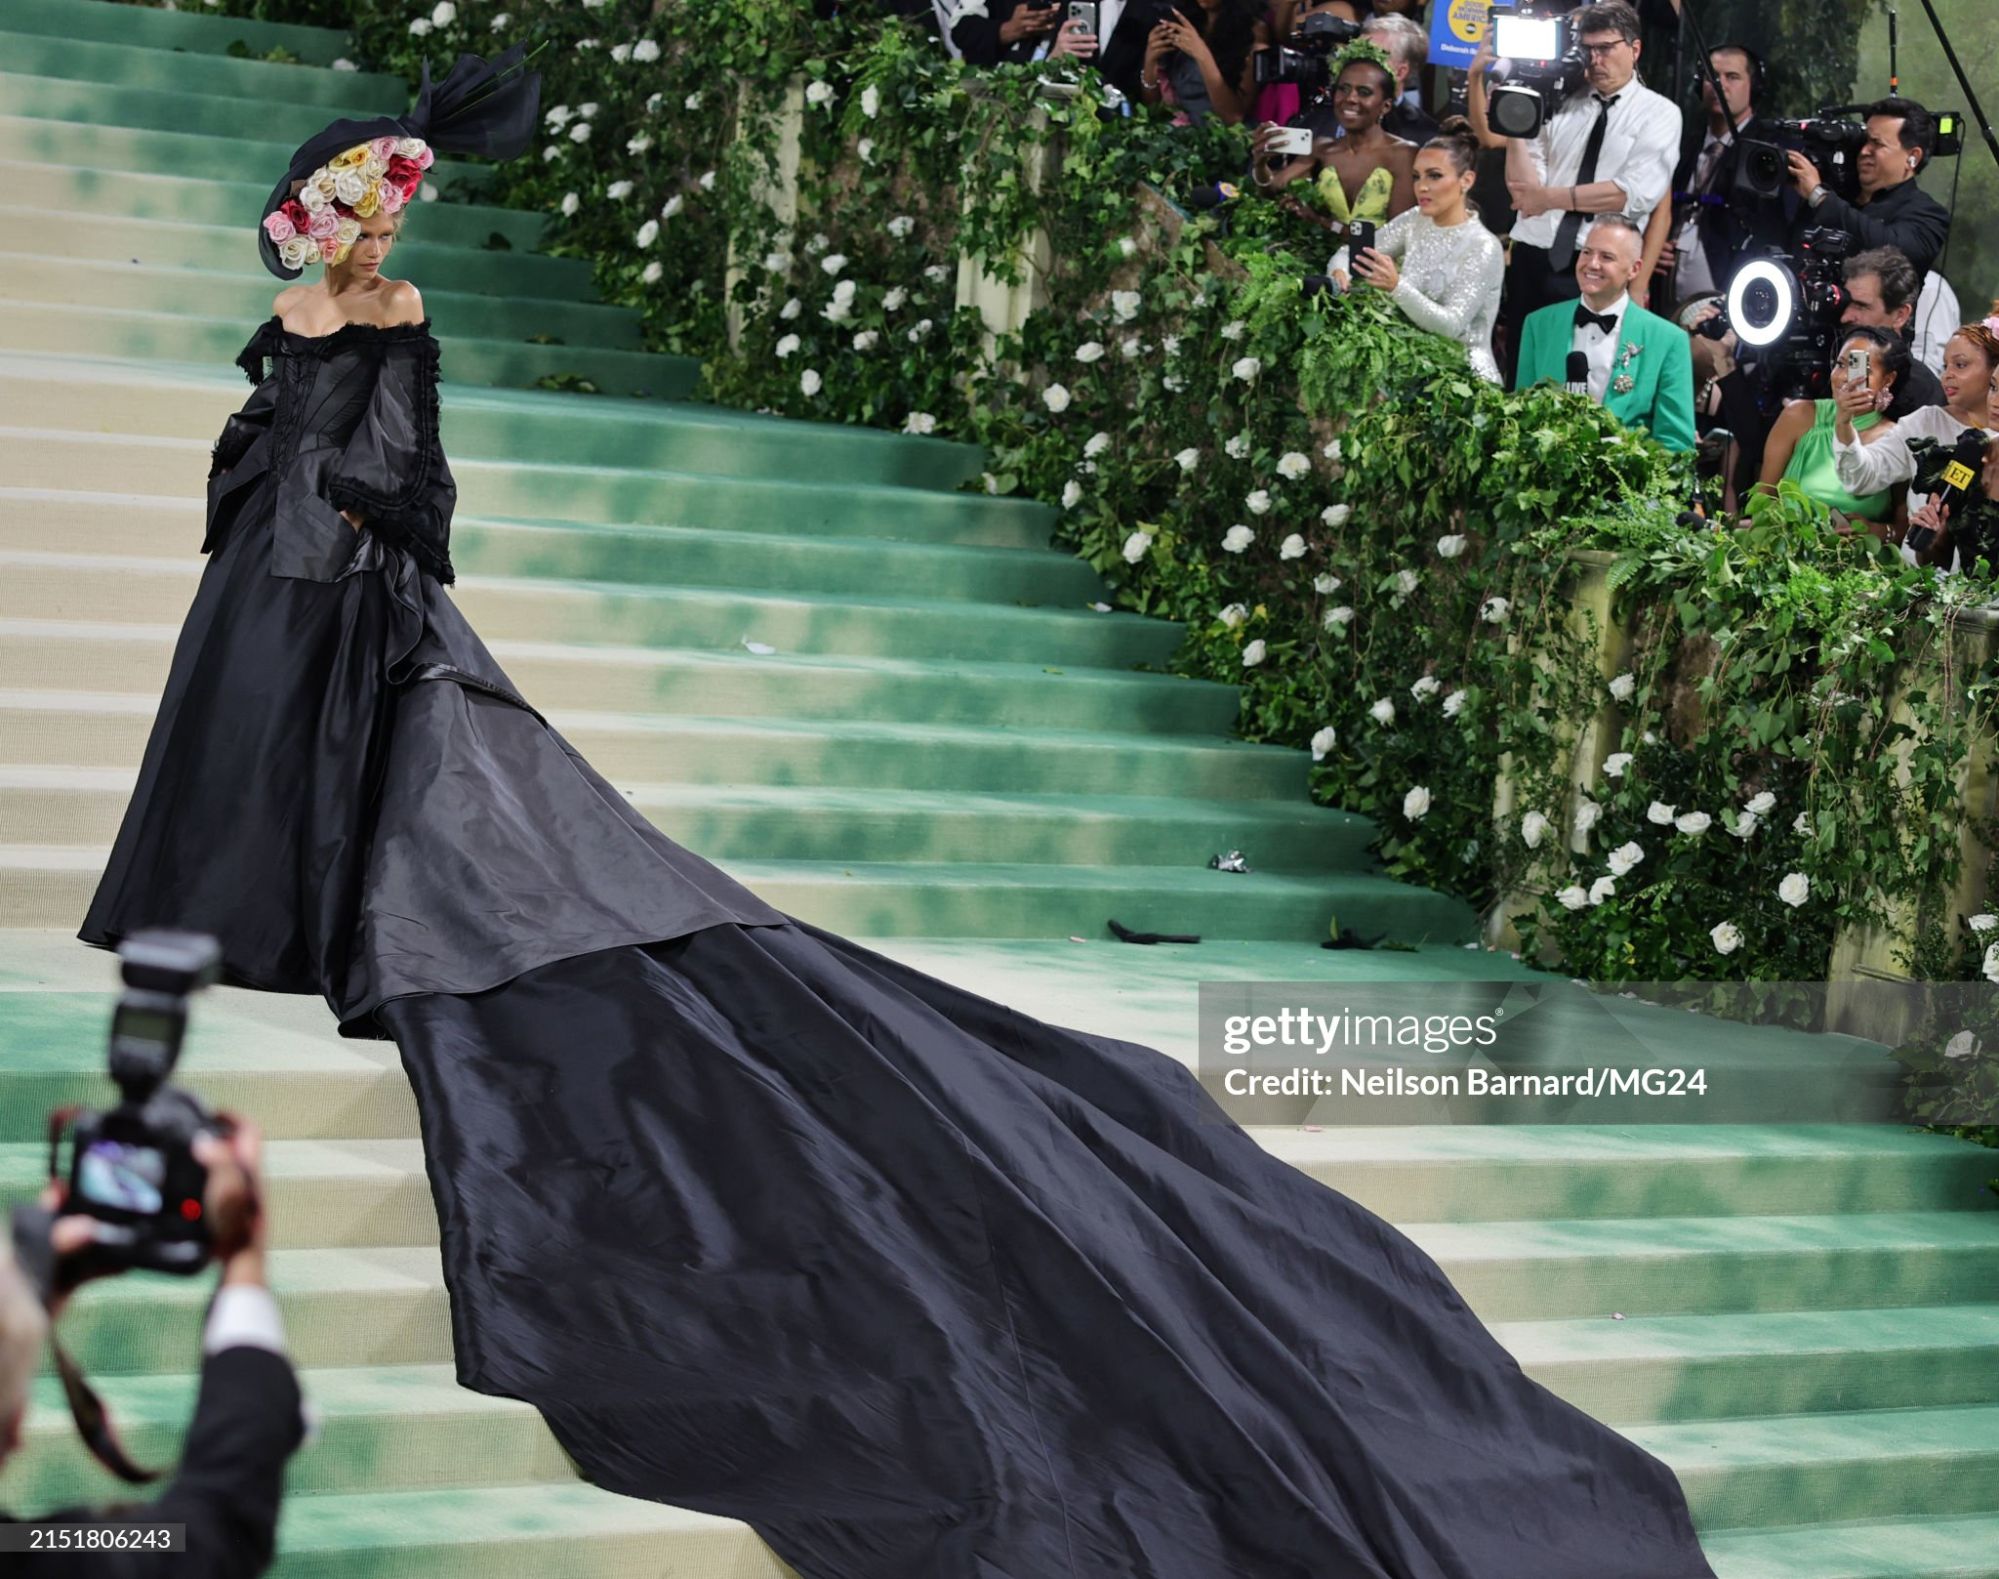 gettyimages-2151806243-2048x2048.jpg